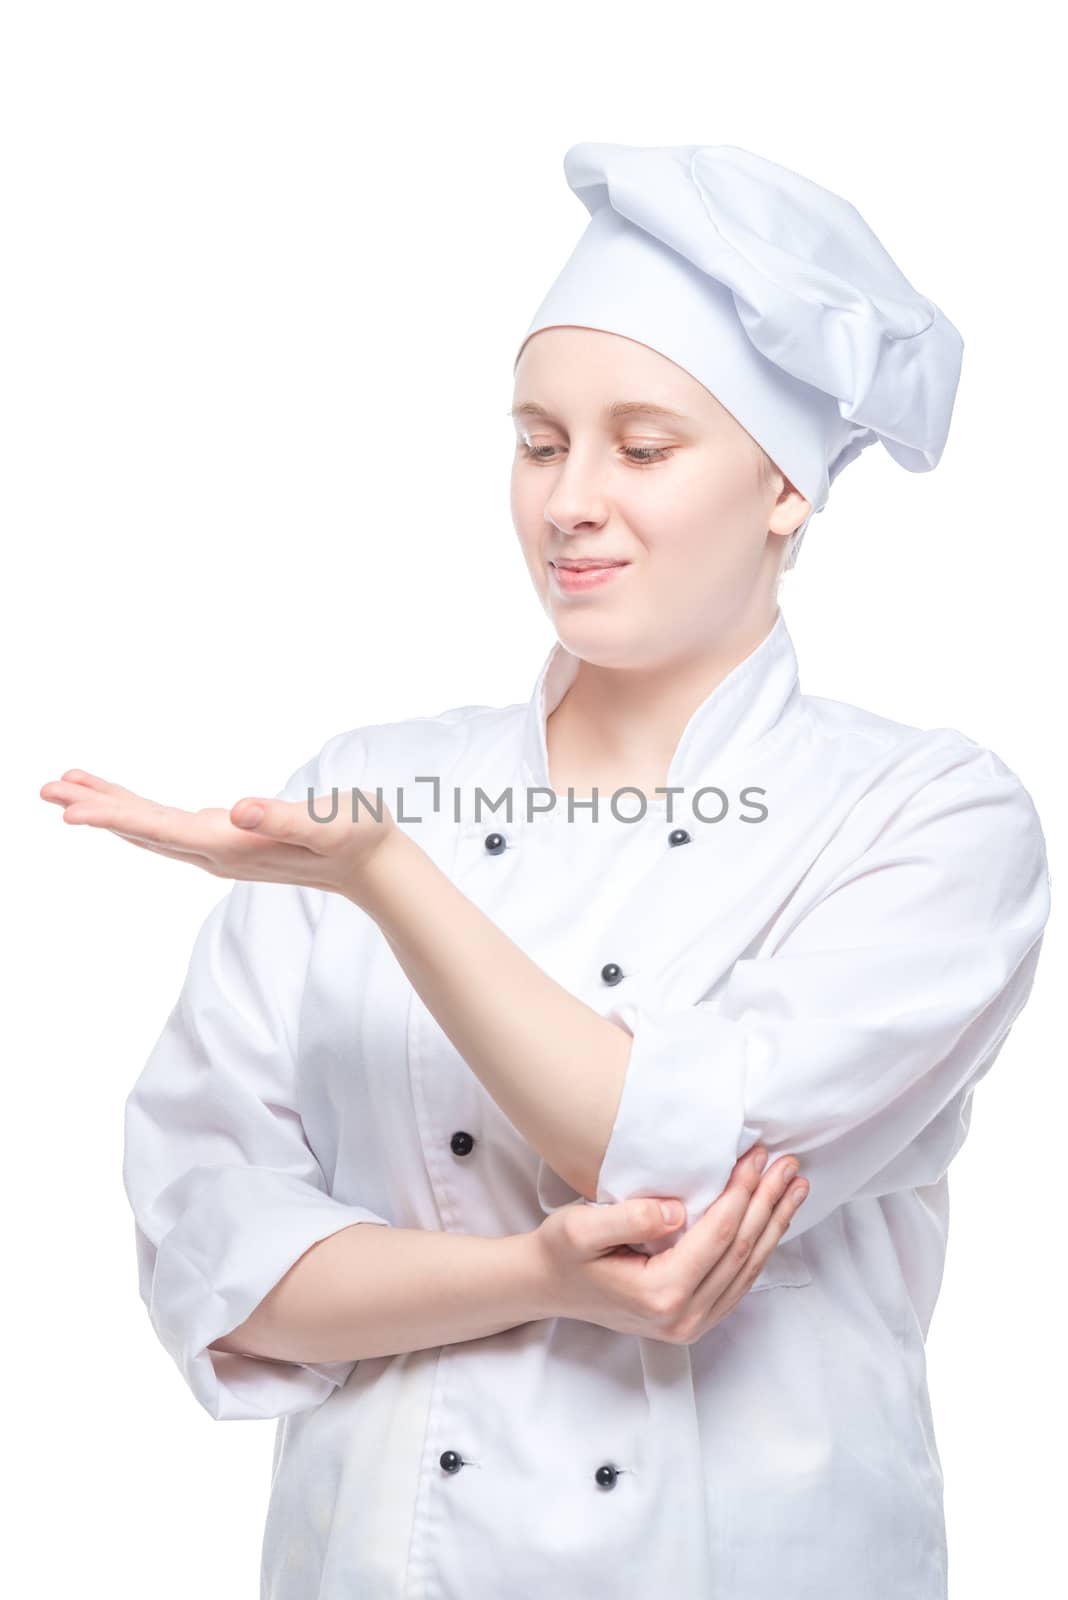 female cook looks at her empty palm, concept photo on white background portrait isolated